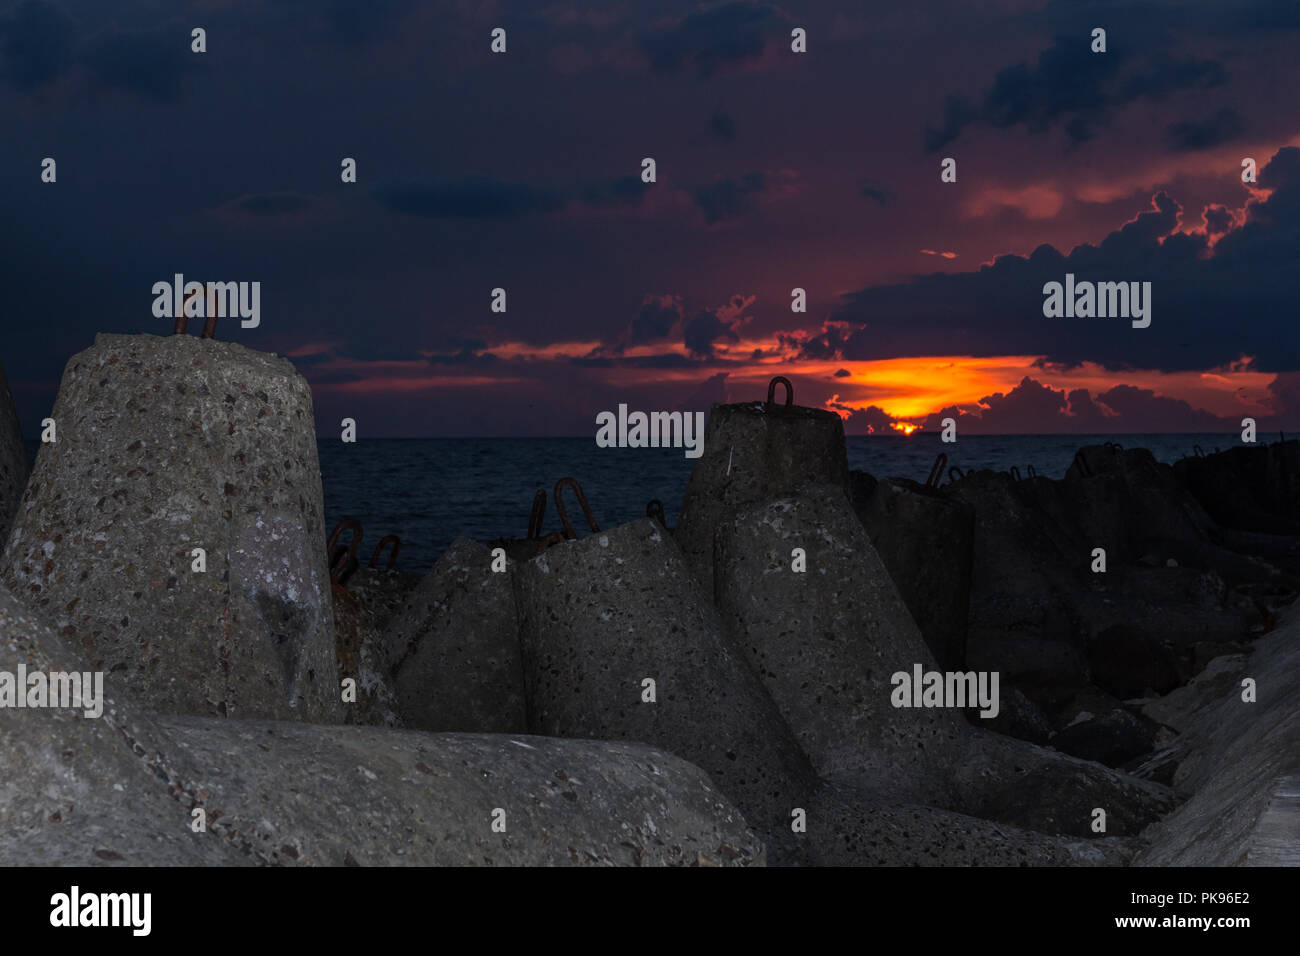 Granite wavebrakers in a Gulf of Riga, Latvia after sunset in August Stock Photo